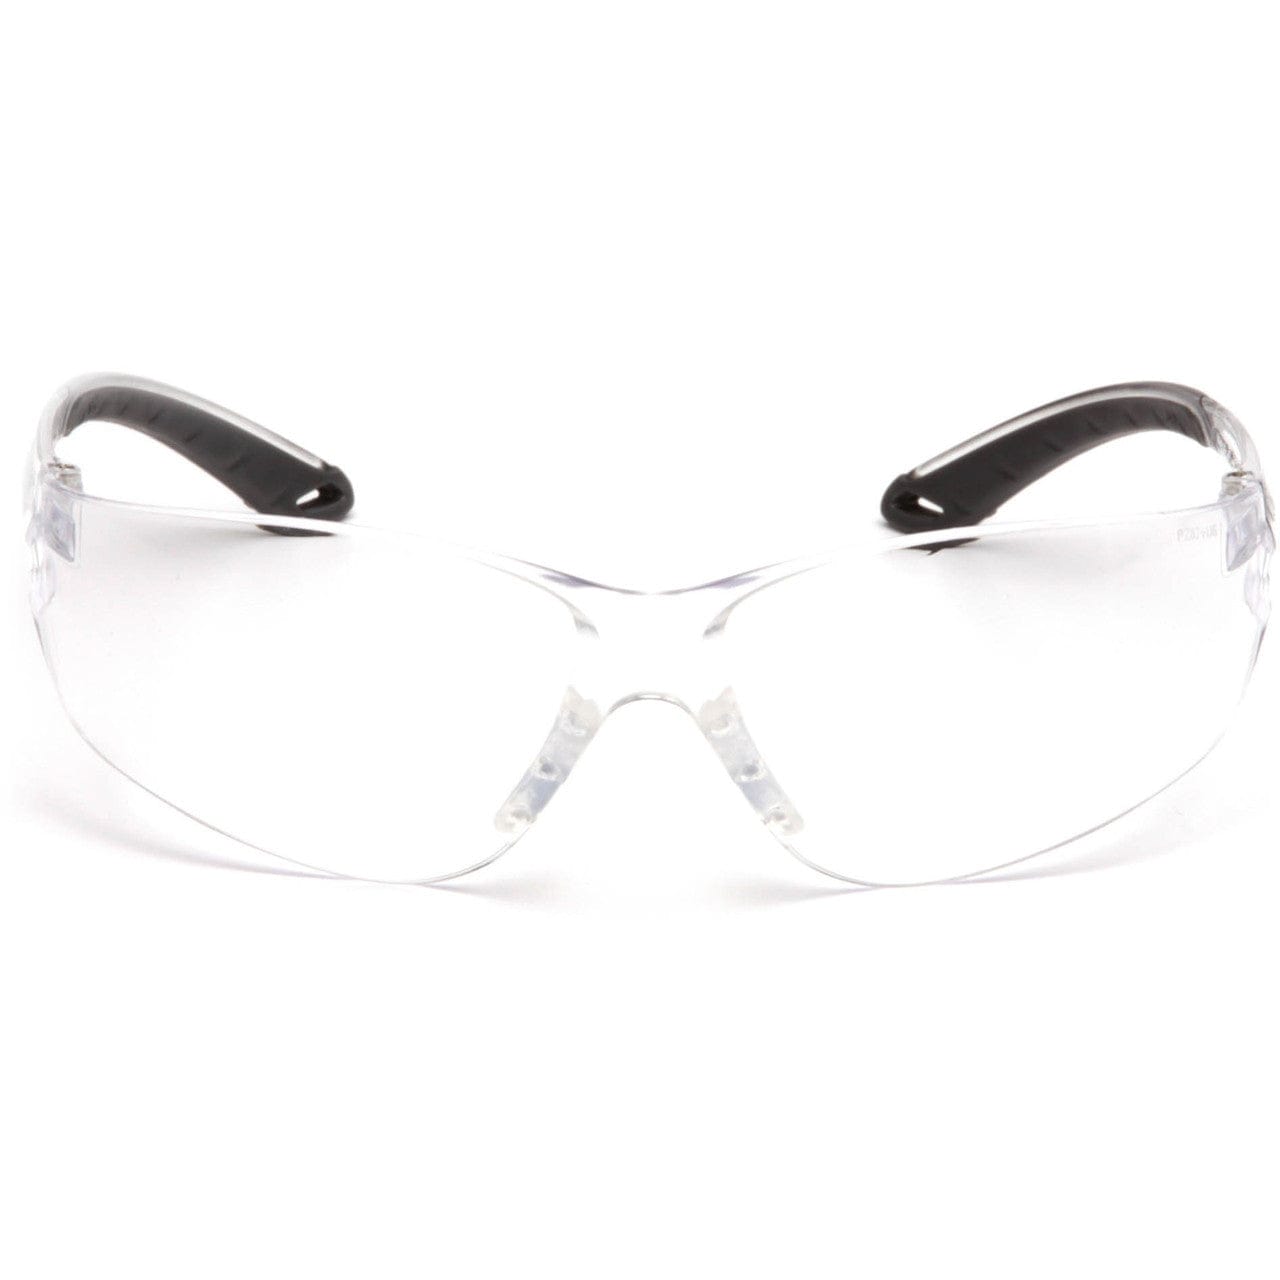 Pyramex Itek Safety Glasses with Clear Lens S5810S Front View